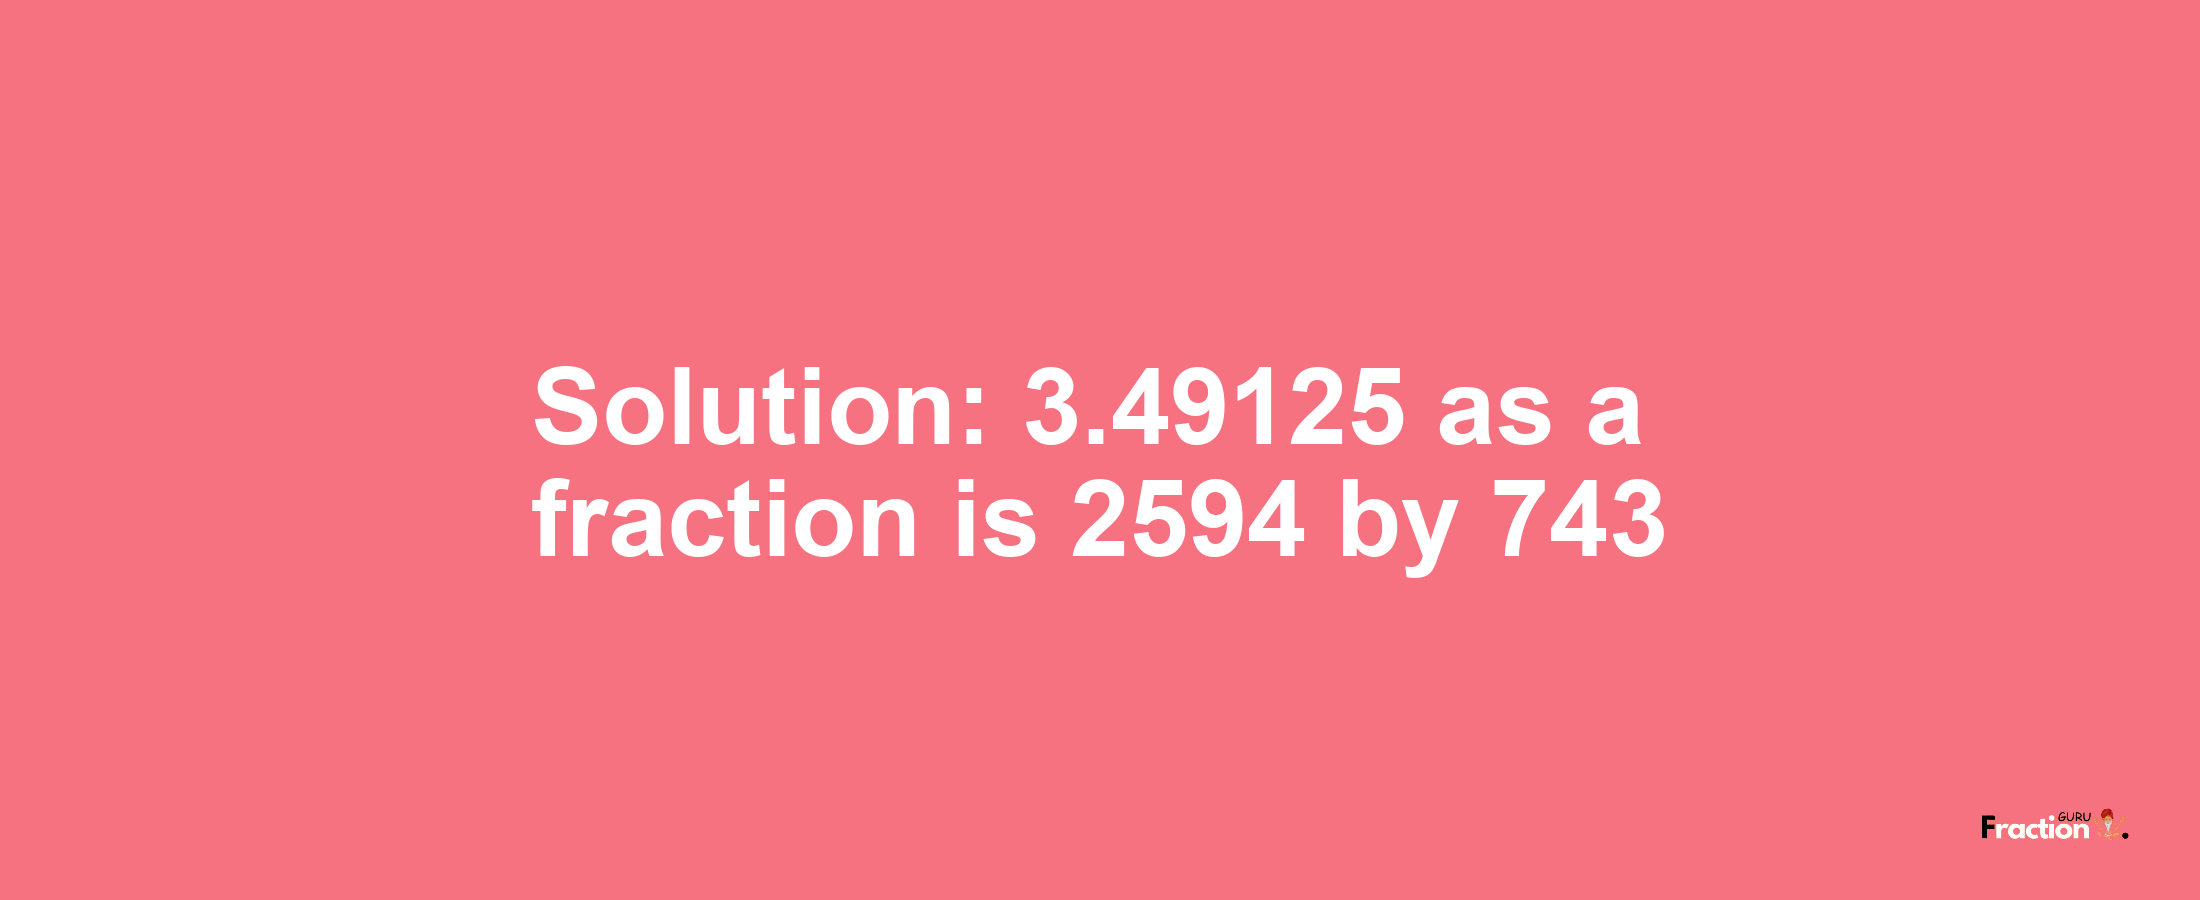 Solution:3.49125 as a fraction is 2594/743